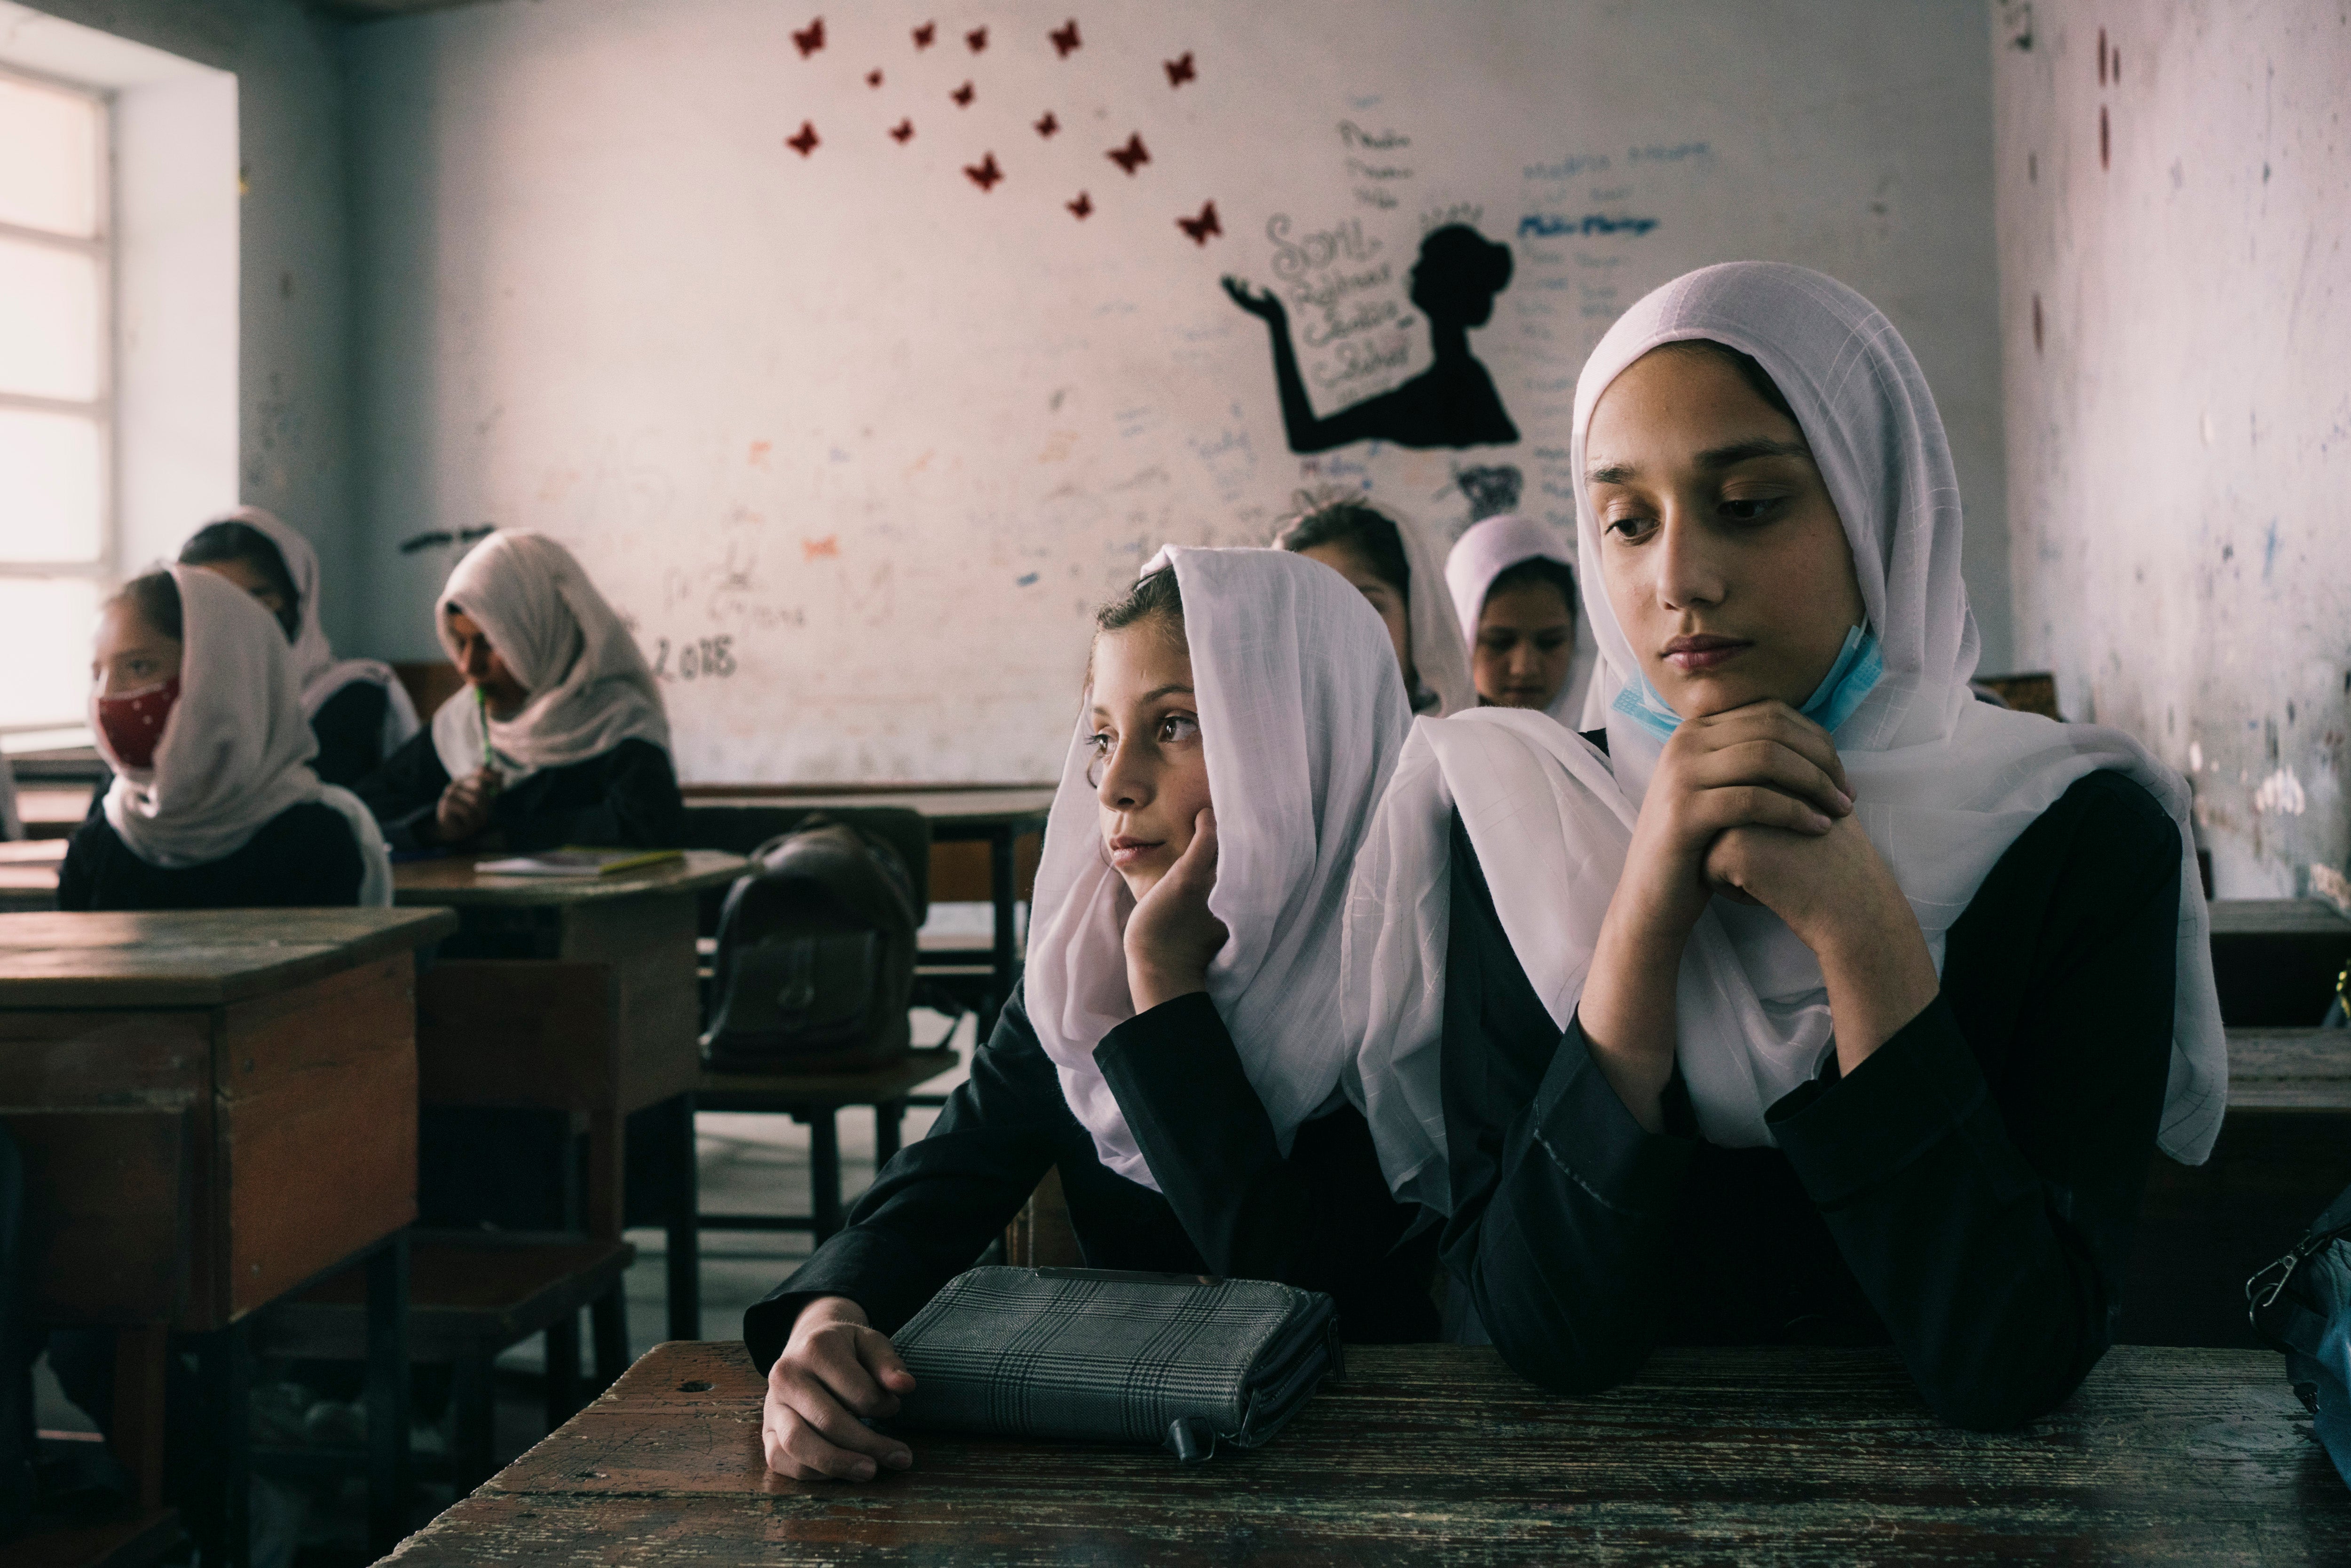 Students attend a sixth-grade class at the Ayesha Durkhani girls’ school in Kabul, Afghanistan, on Wednesday 23 March